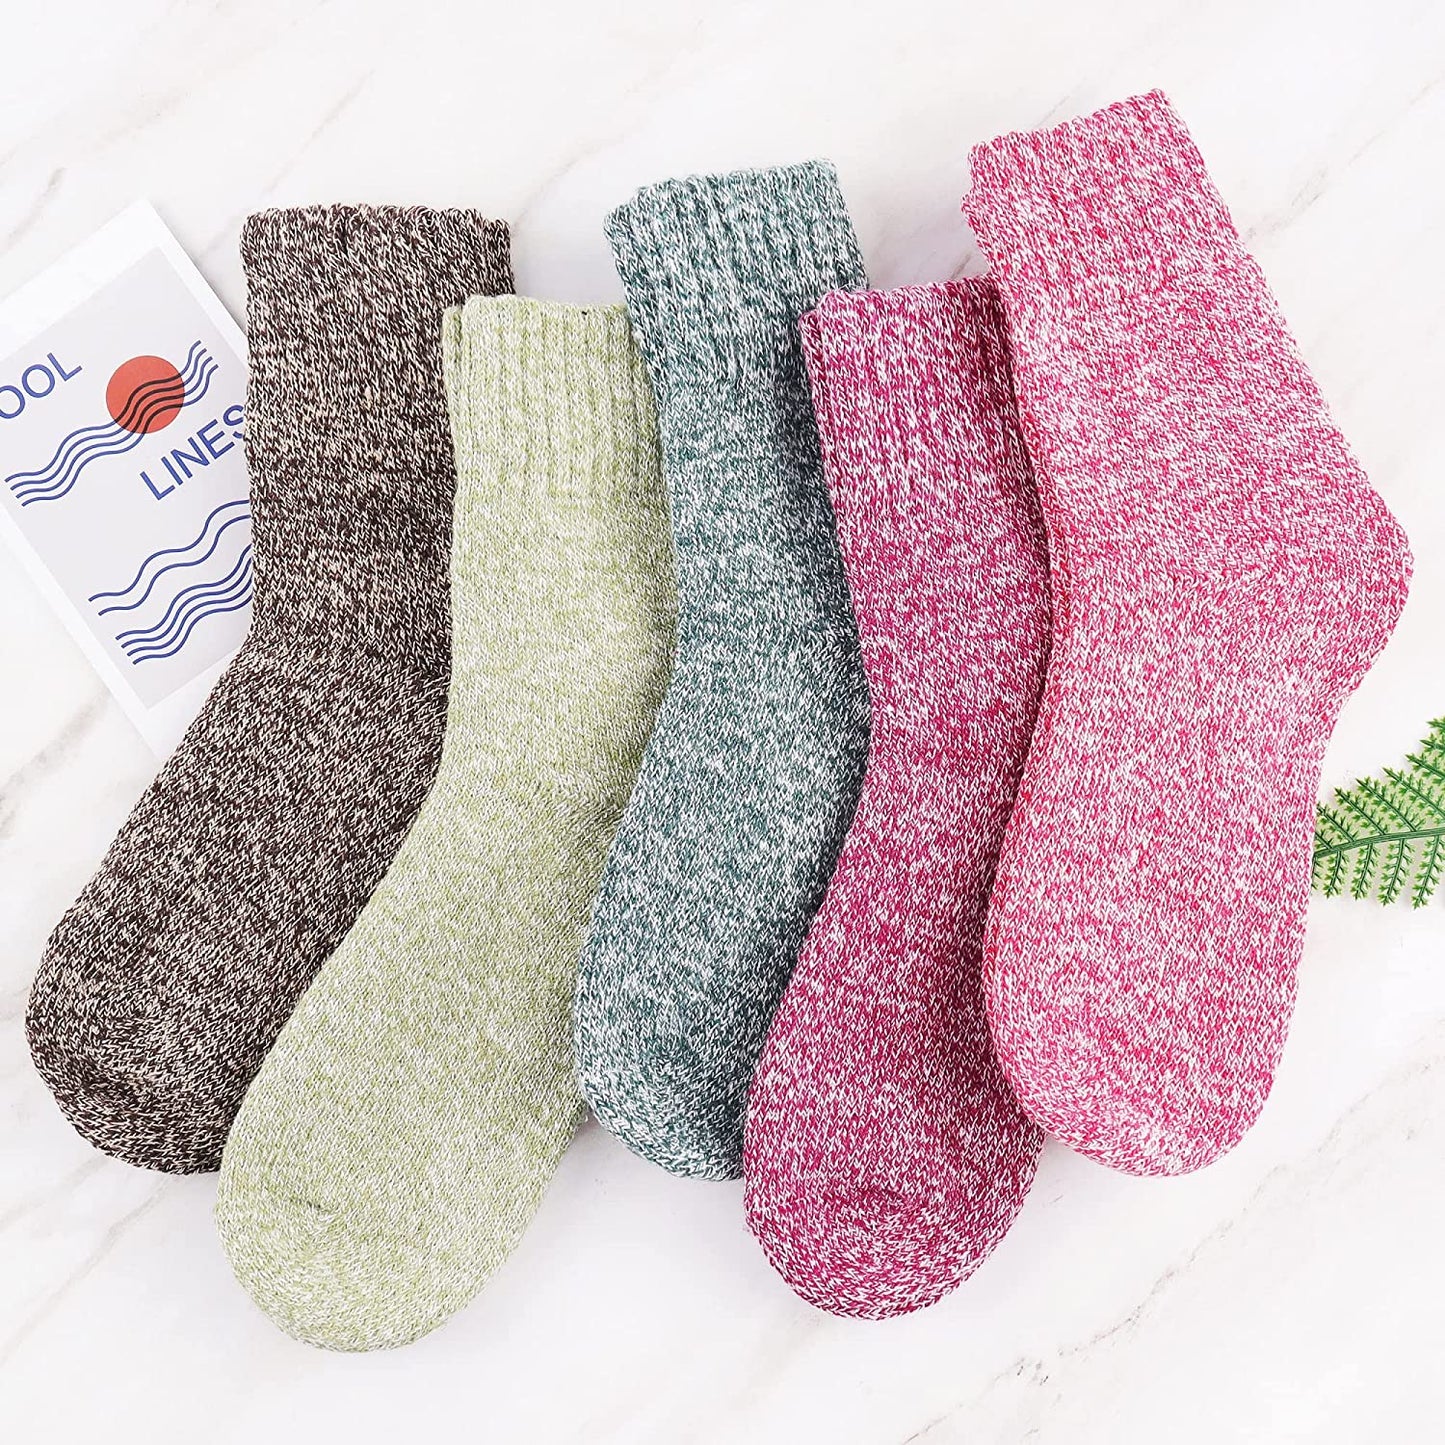  5 Pairs Wool Socks for Women Warm Winter Thermal Thick Socks Gifts for Women